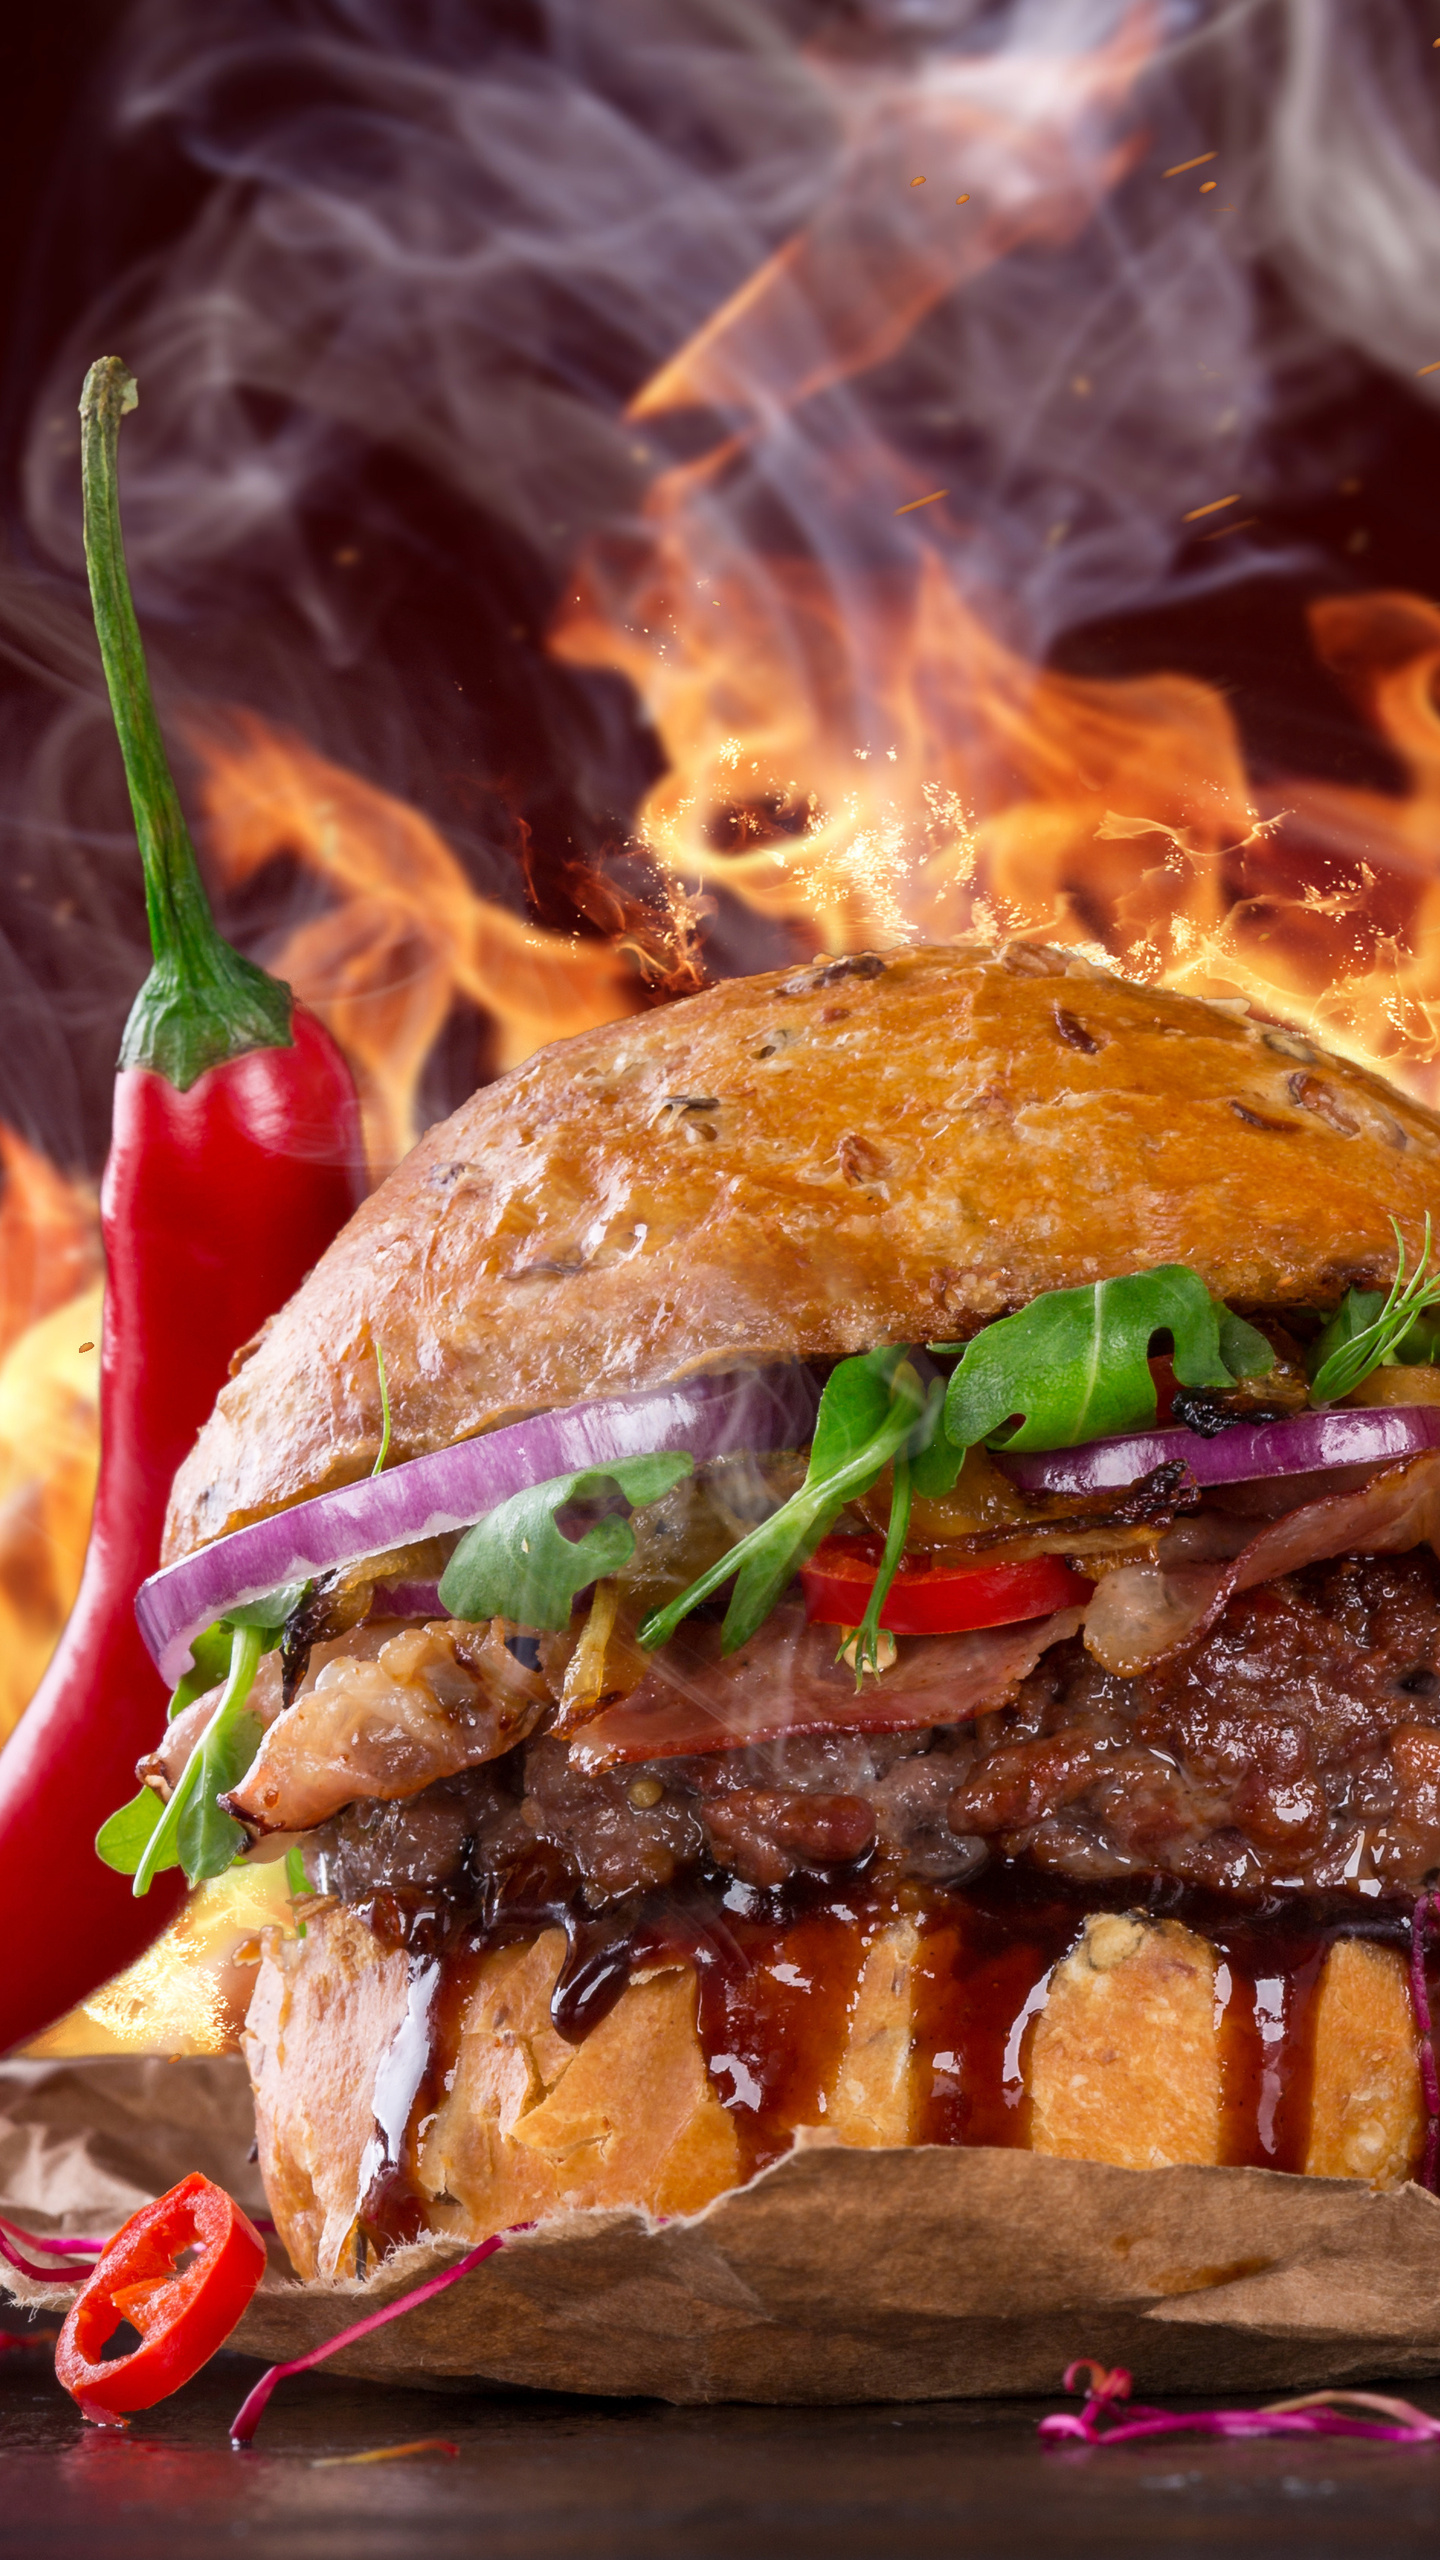 Hot Spicy Burger Wallpaper In 1440x2560 Resolution